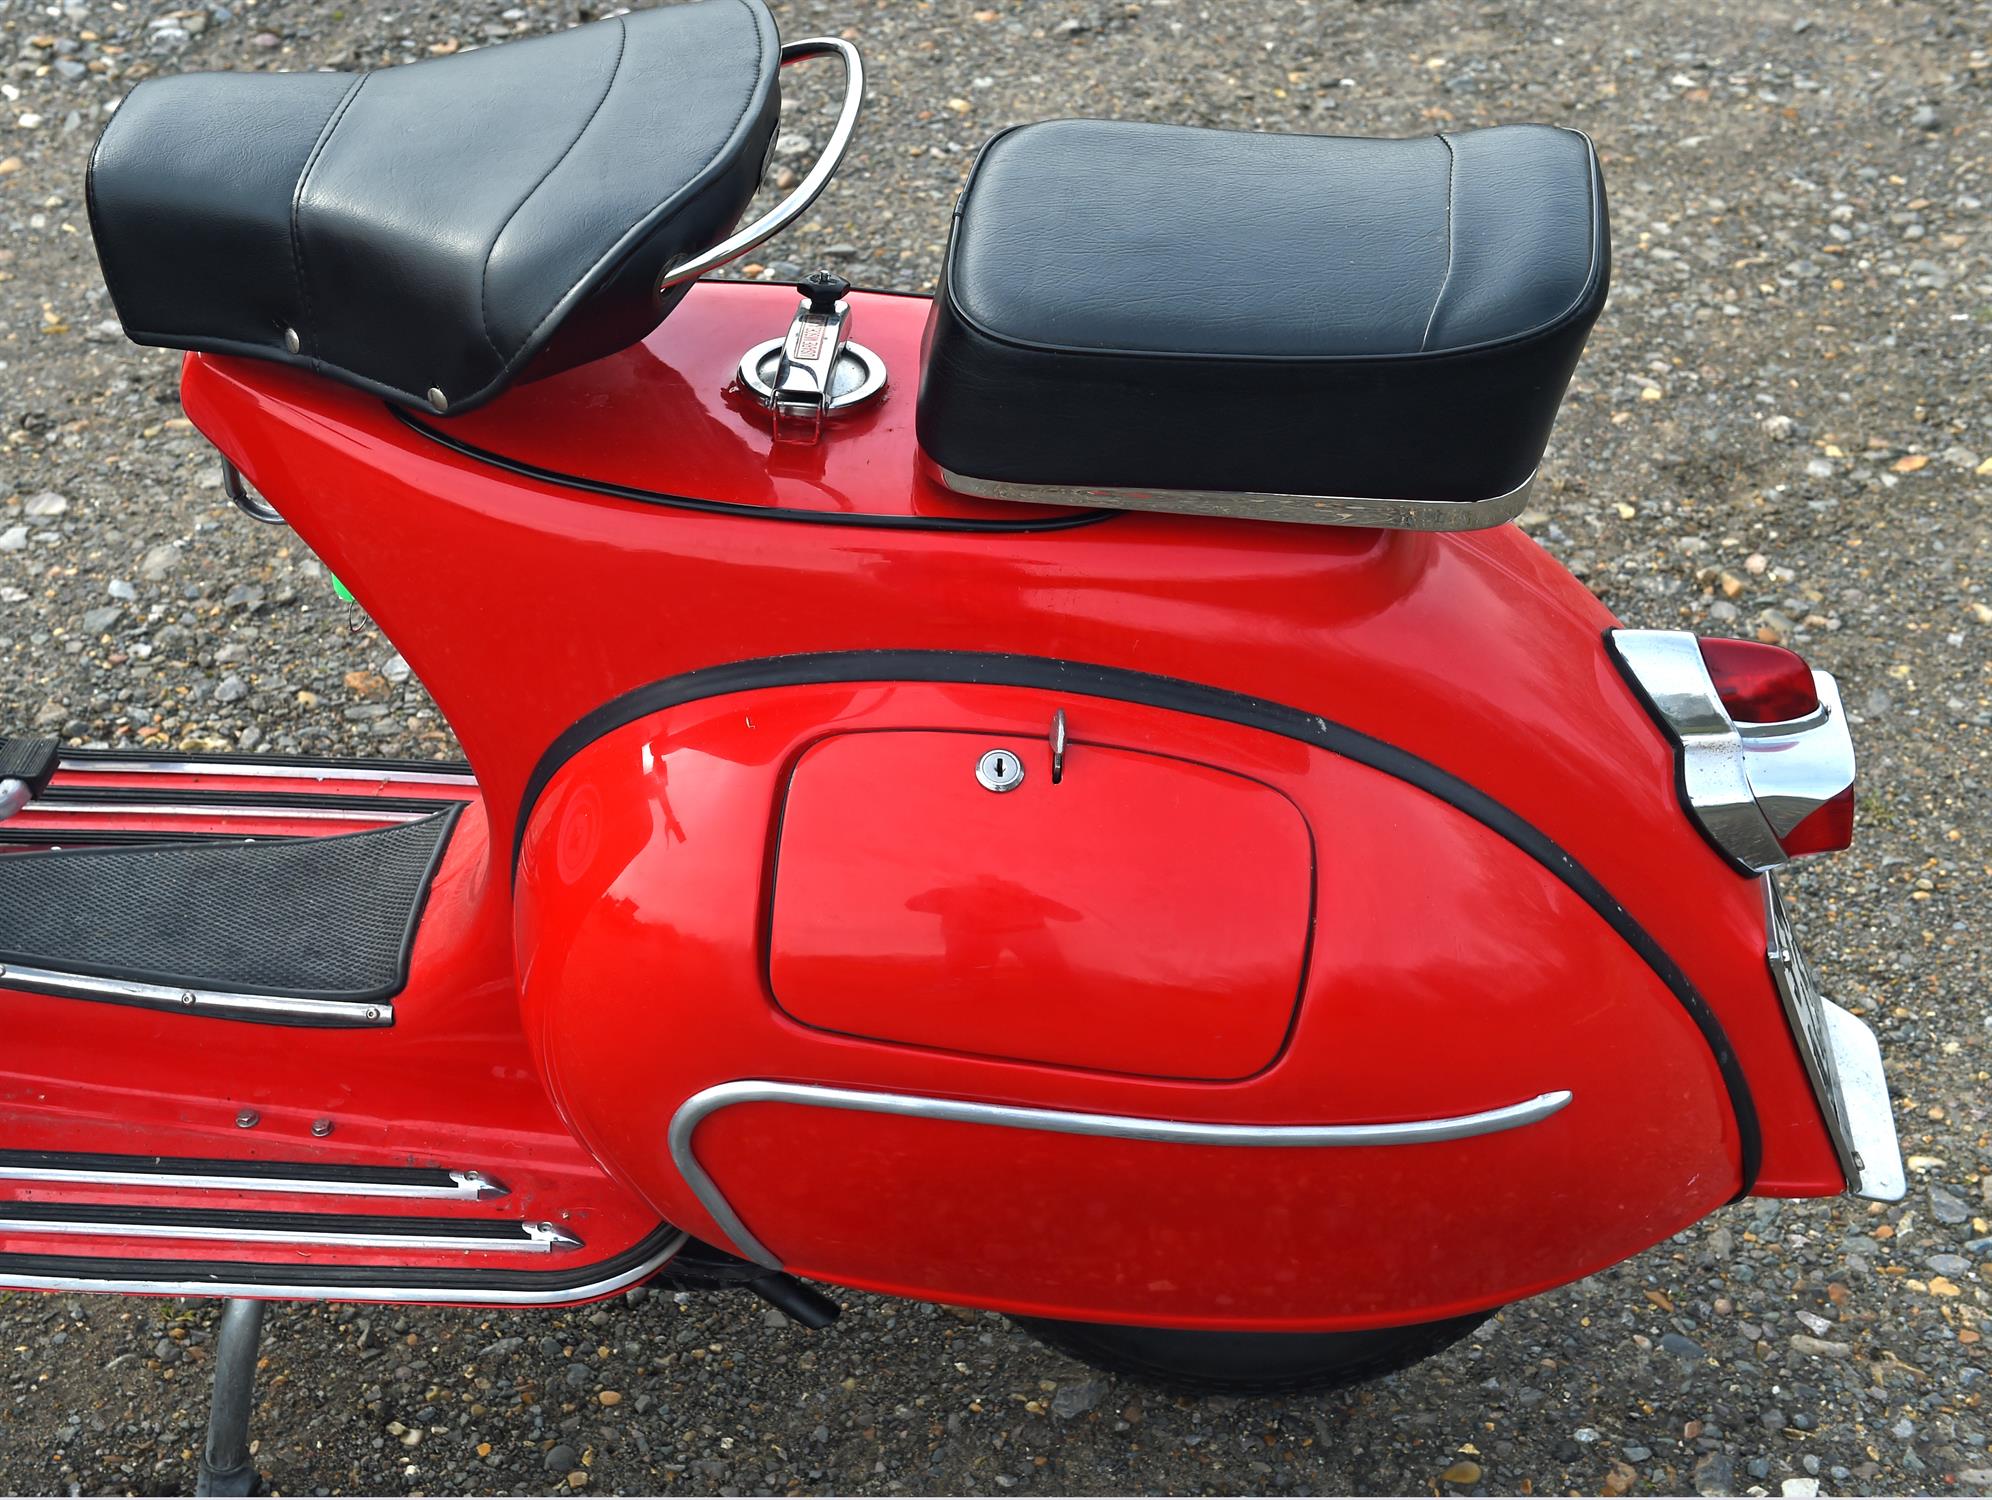 1961 Vespa VBB Standard 150cc 4 Speed. Registration number: 864 XVN. It was imported into the UK - Image 5 of 9